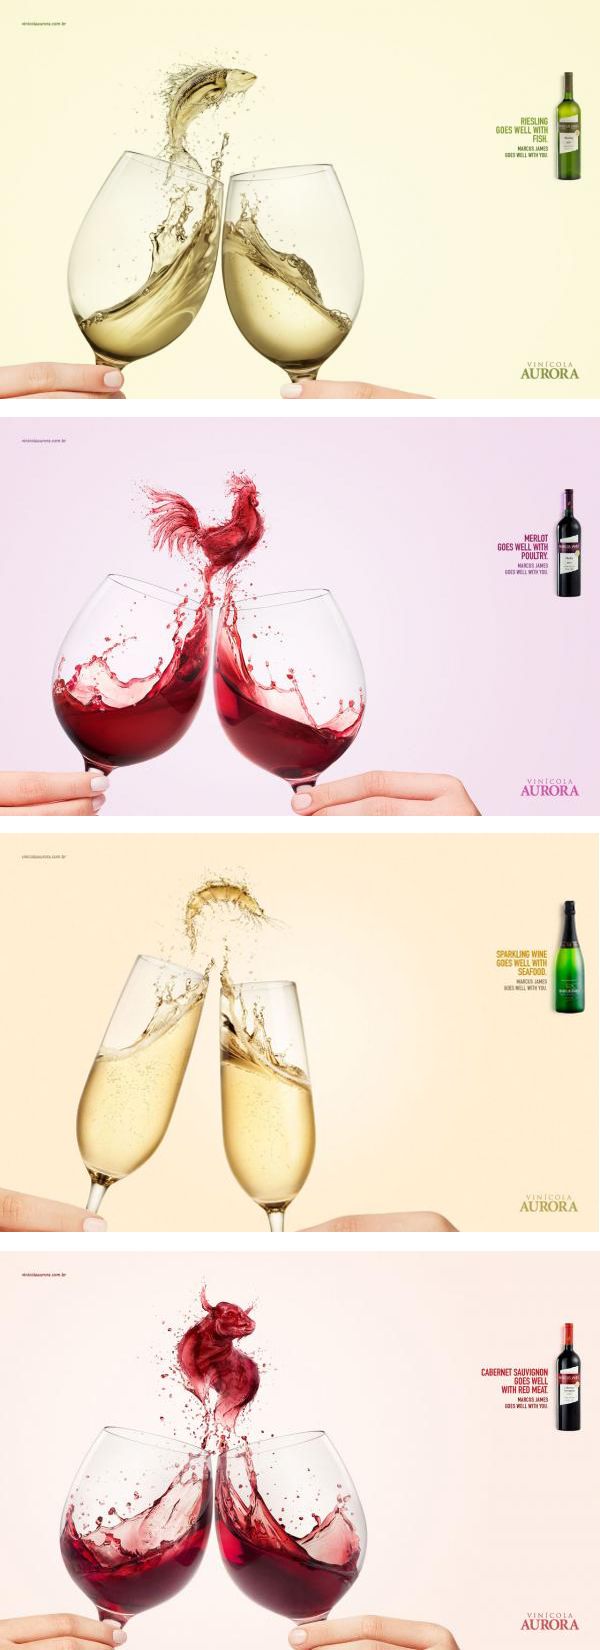 Print-Advertising-advertising-set-Campaign-for-Aurora-Wines Print Advertising : advertising set | Campaign for Aurora Wines